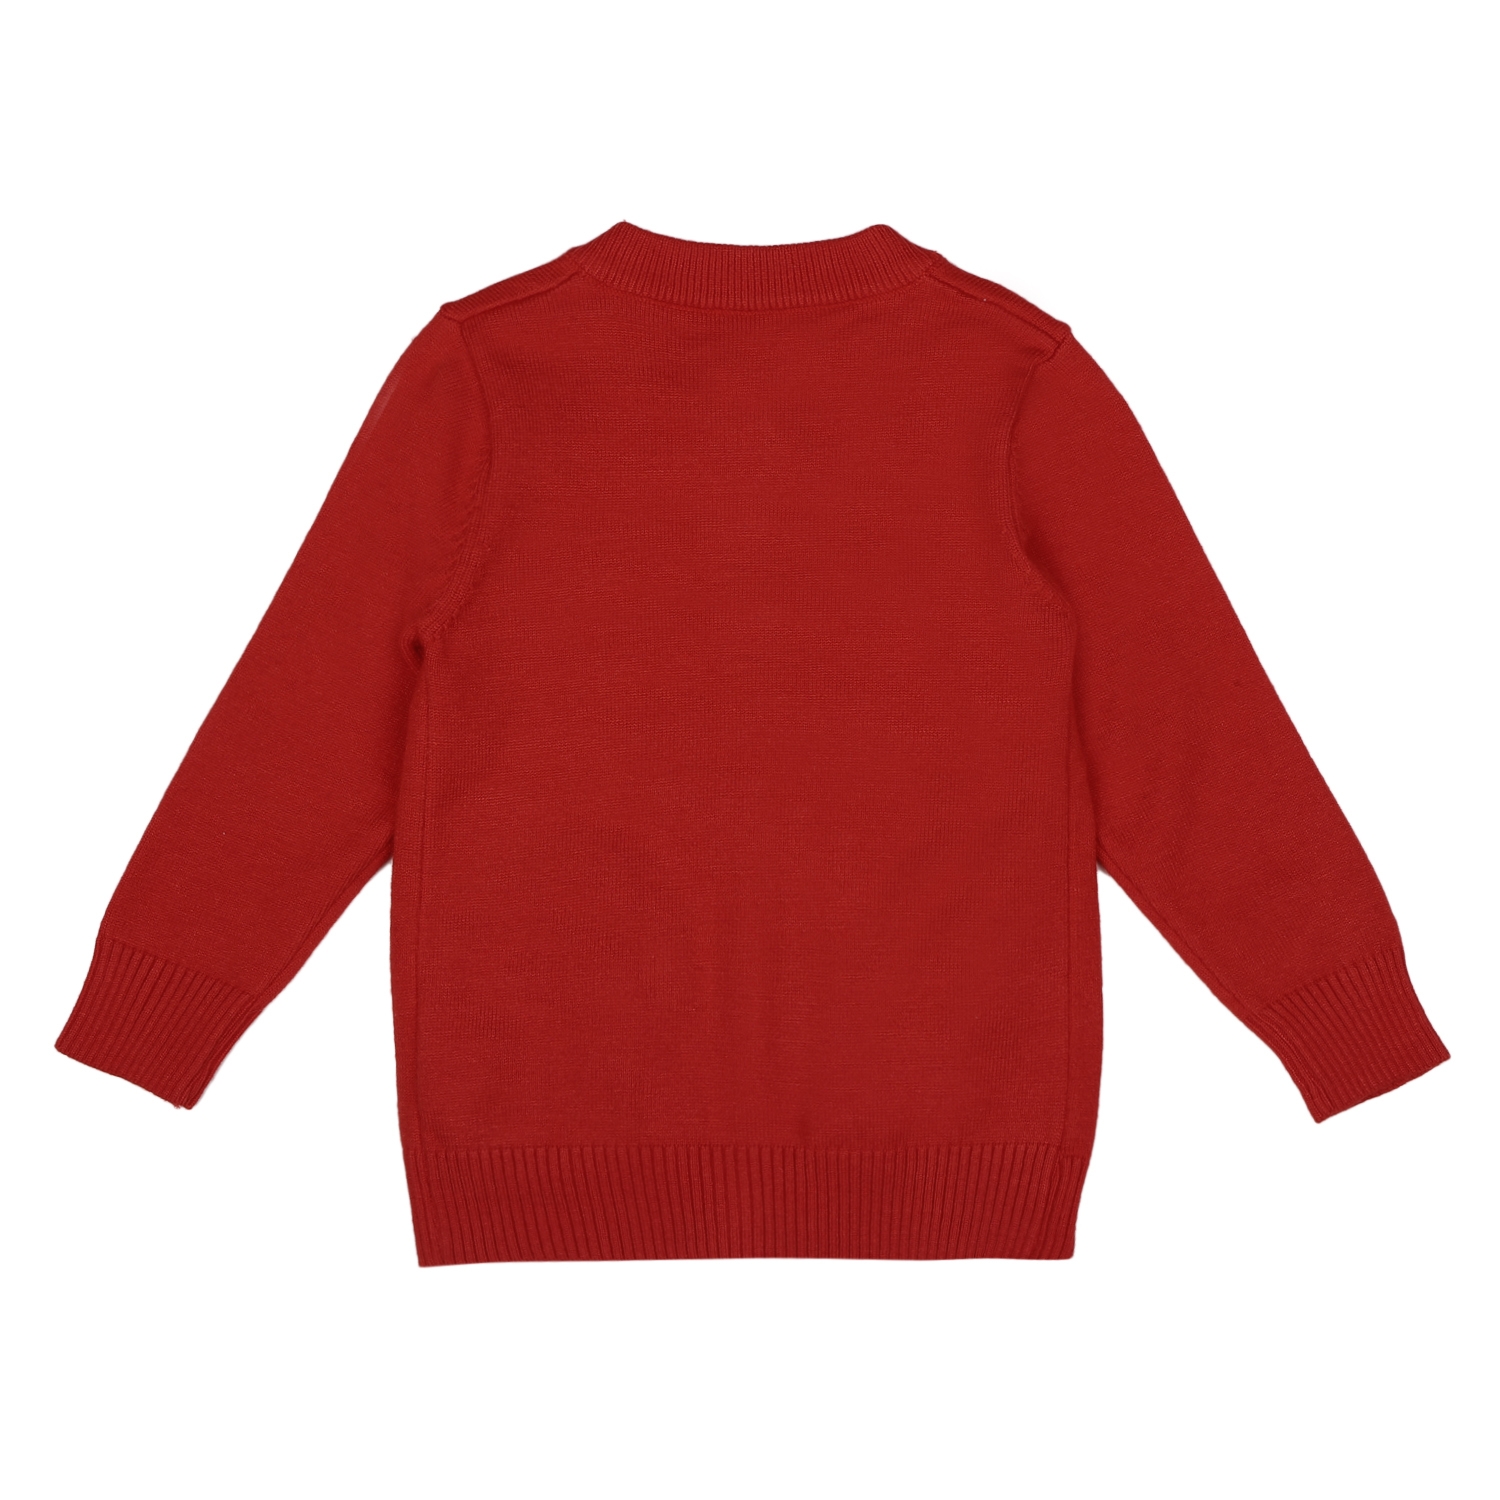 Mothercare | Girls Full sleeves Sweater - Red 1